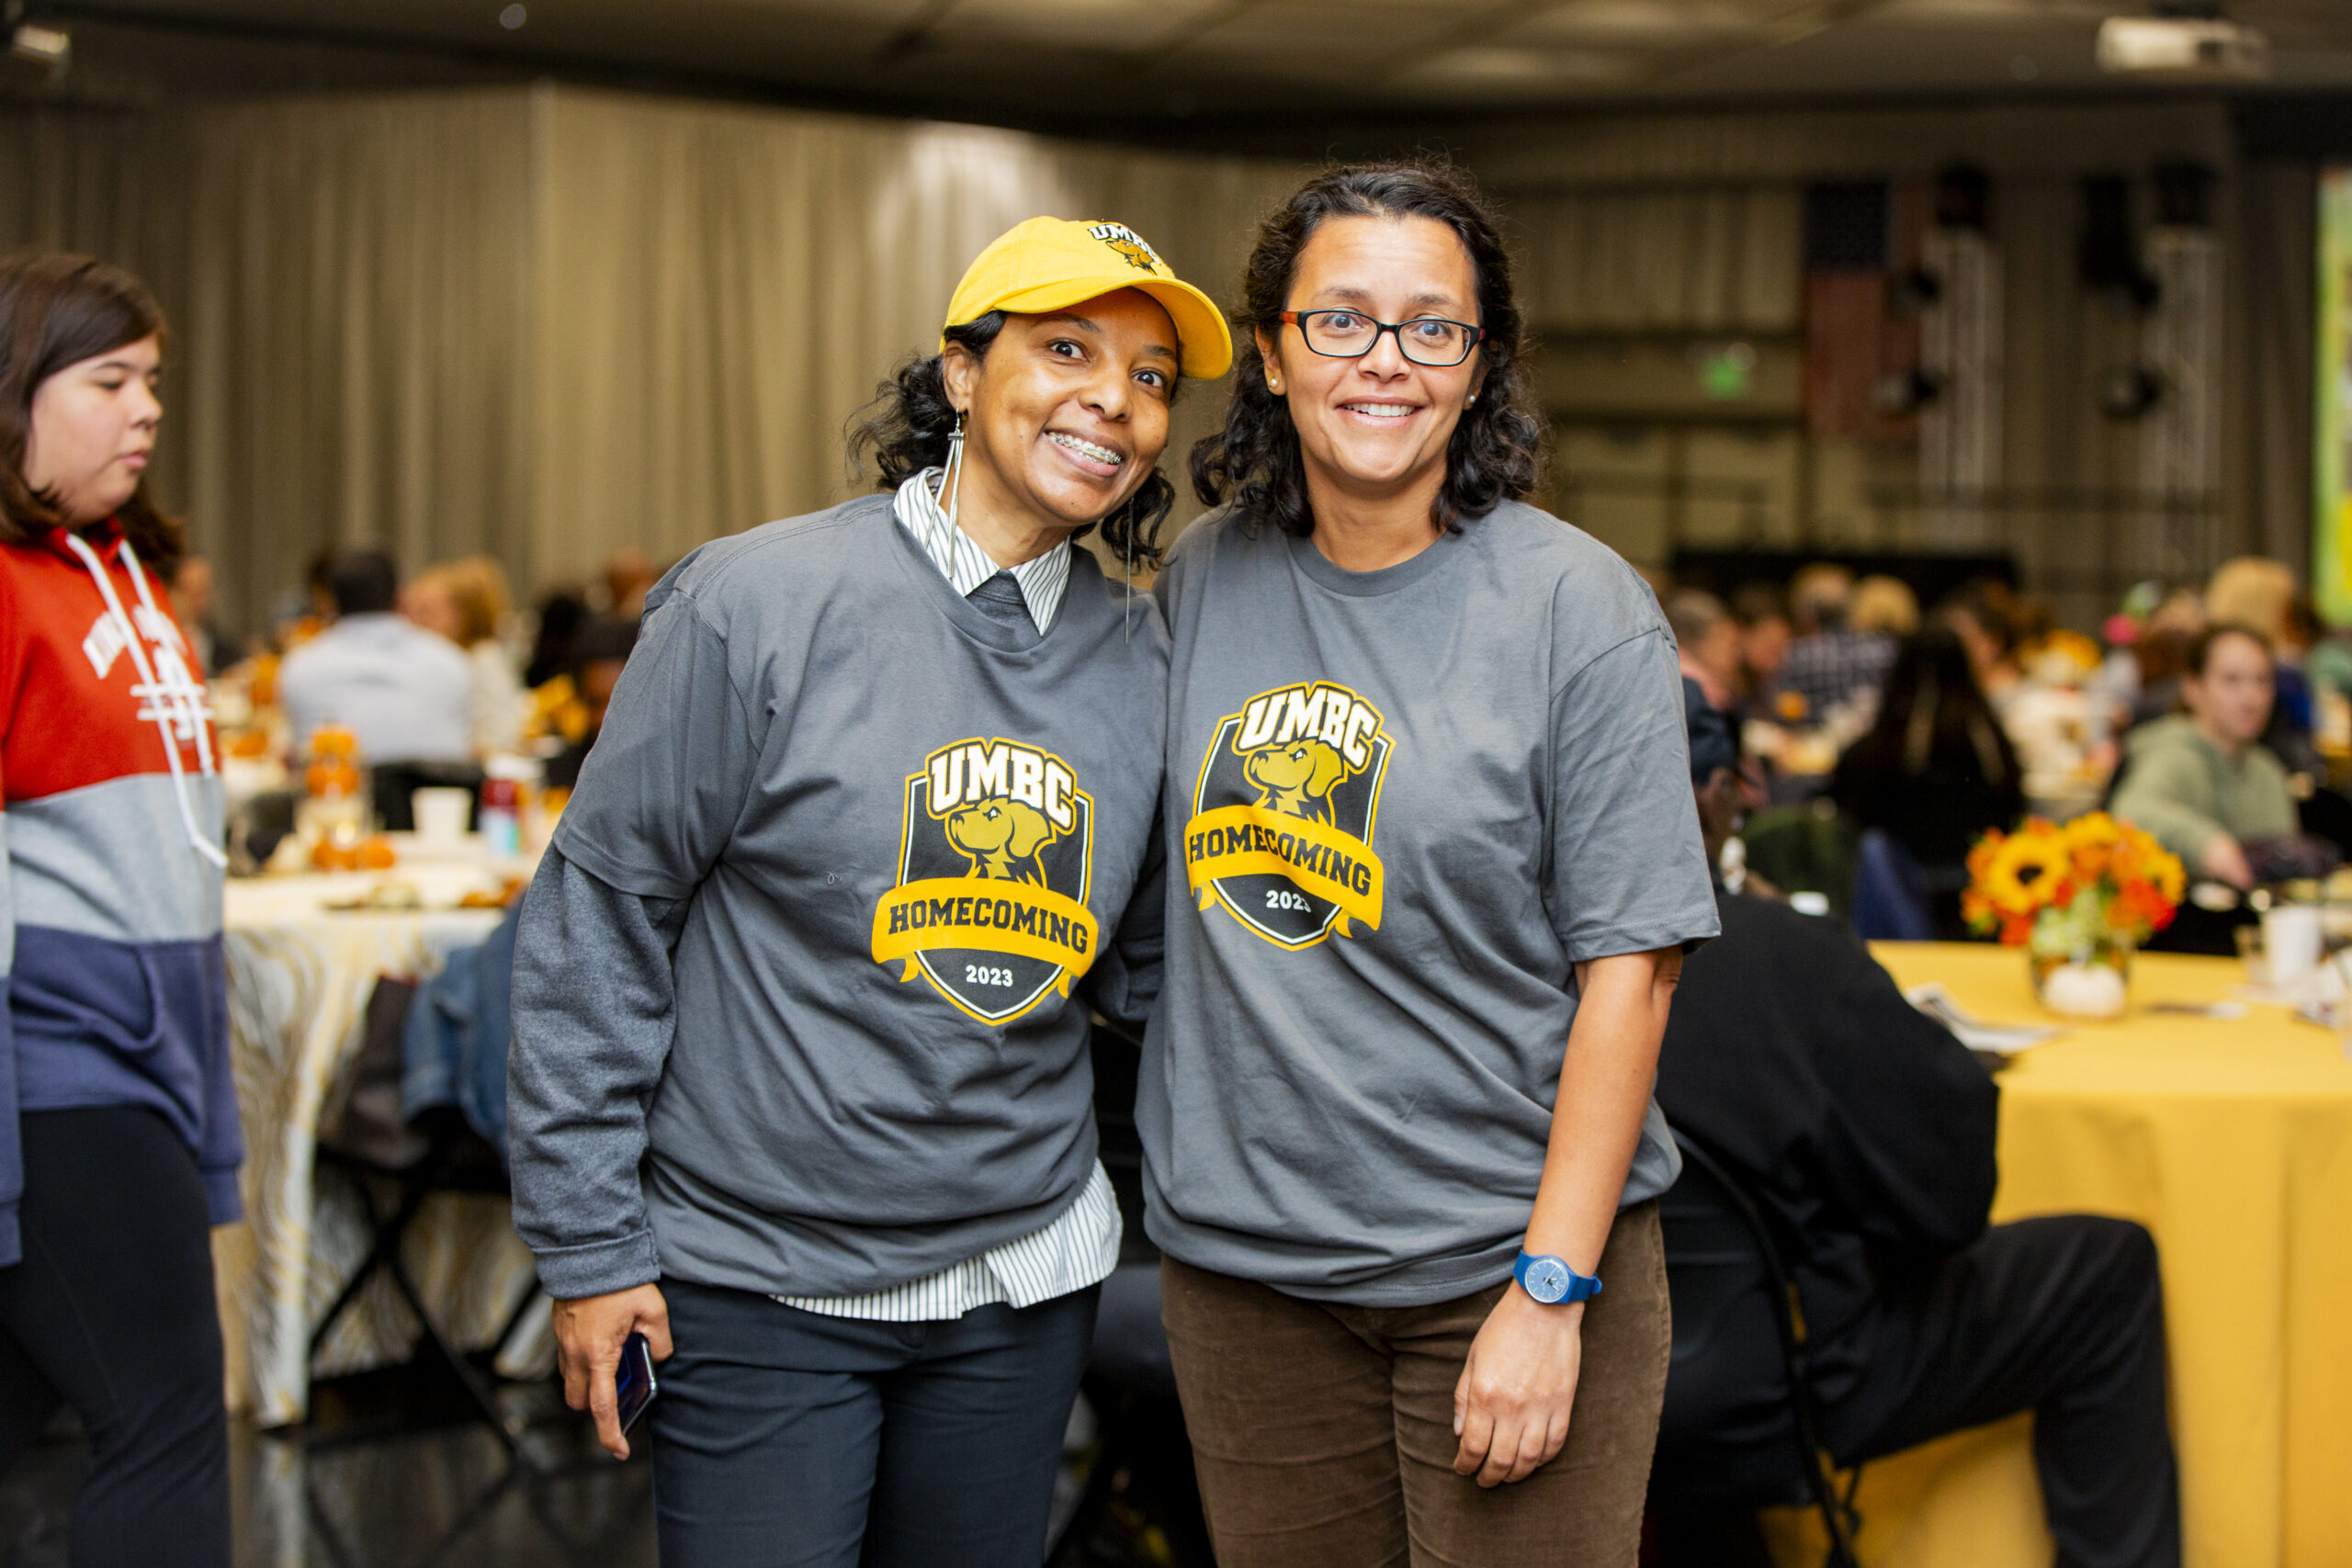 Two individuals stand smiling indoors wearing gray UMBC Homecoming t-shirts.